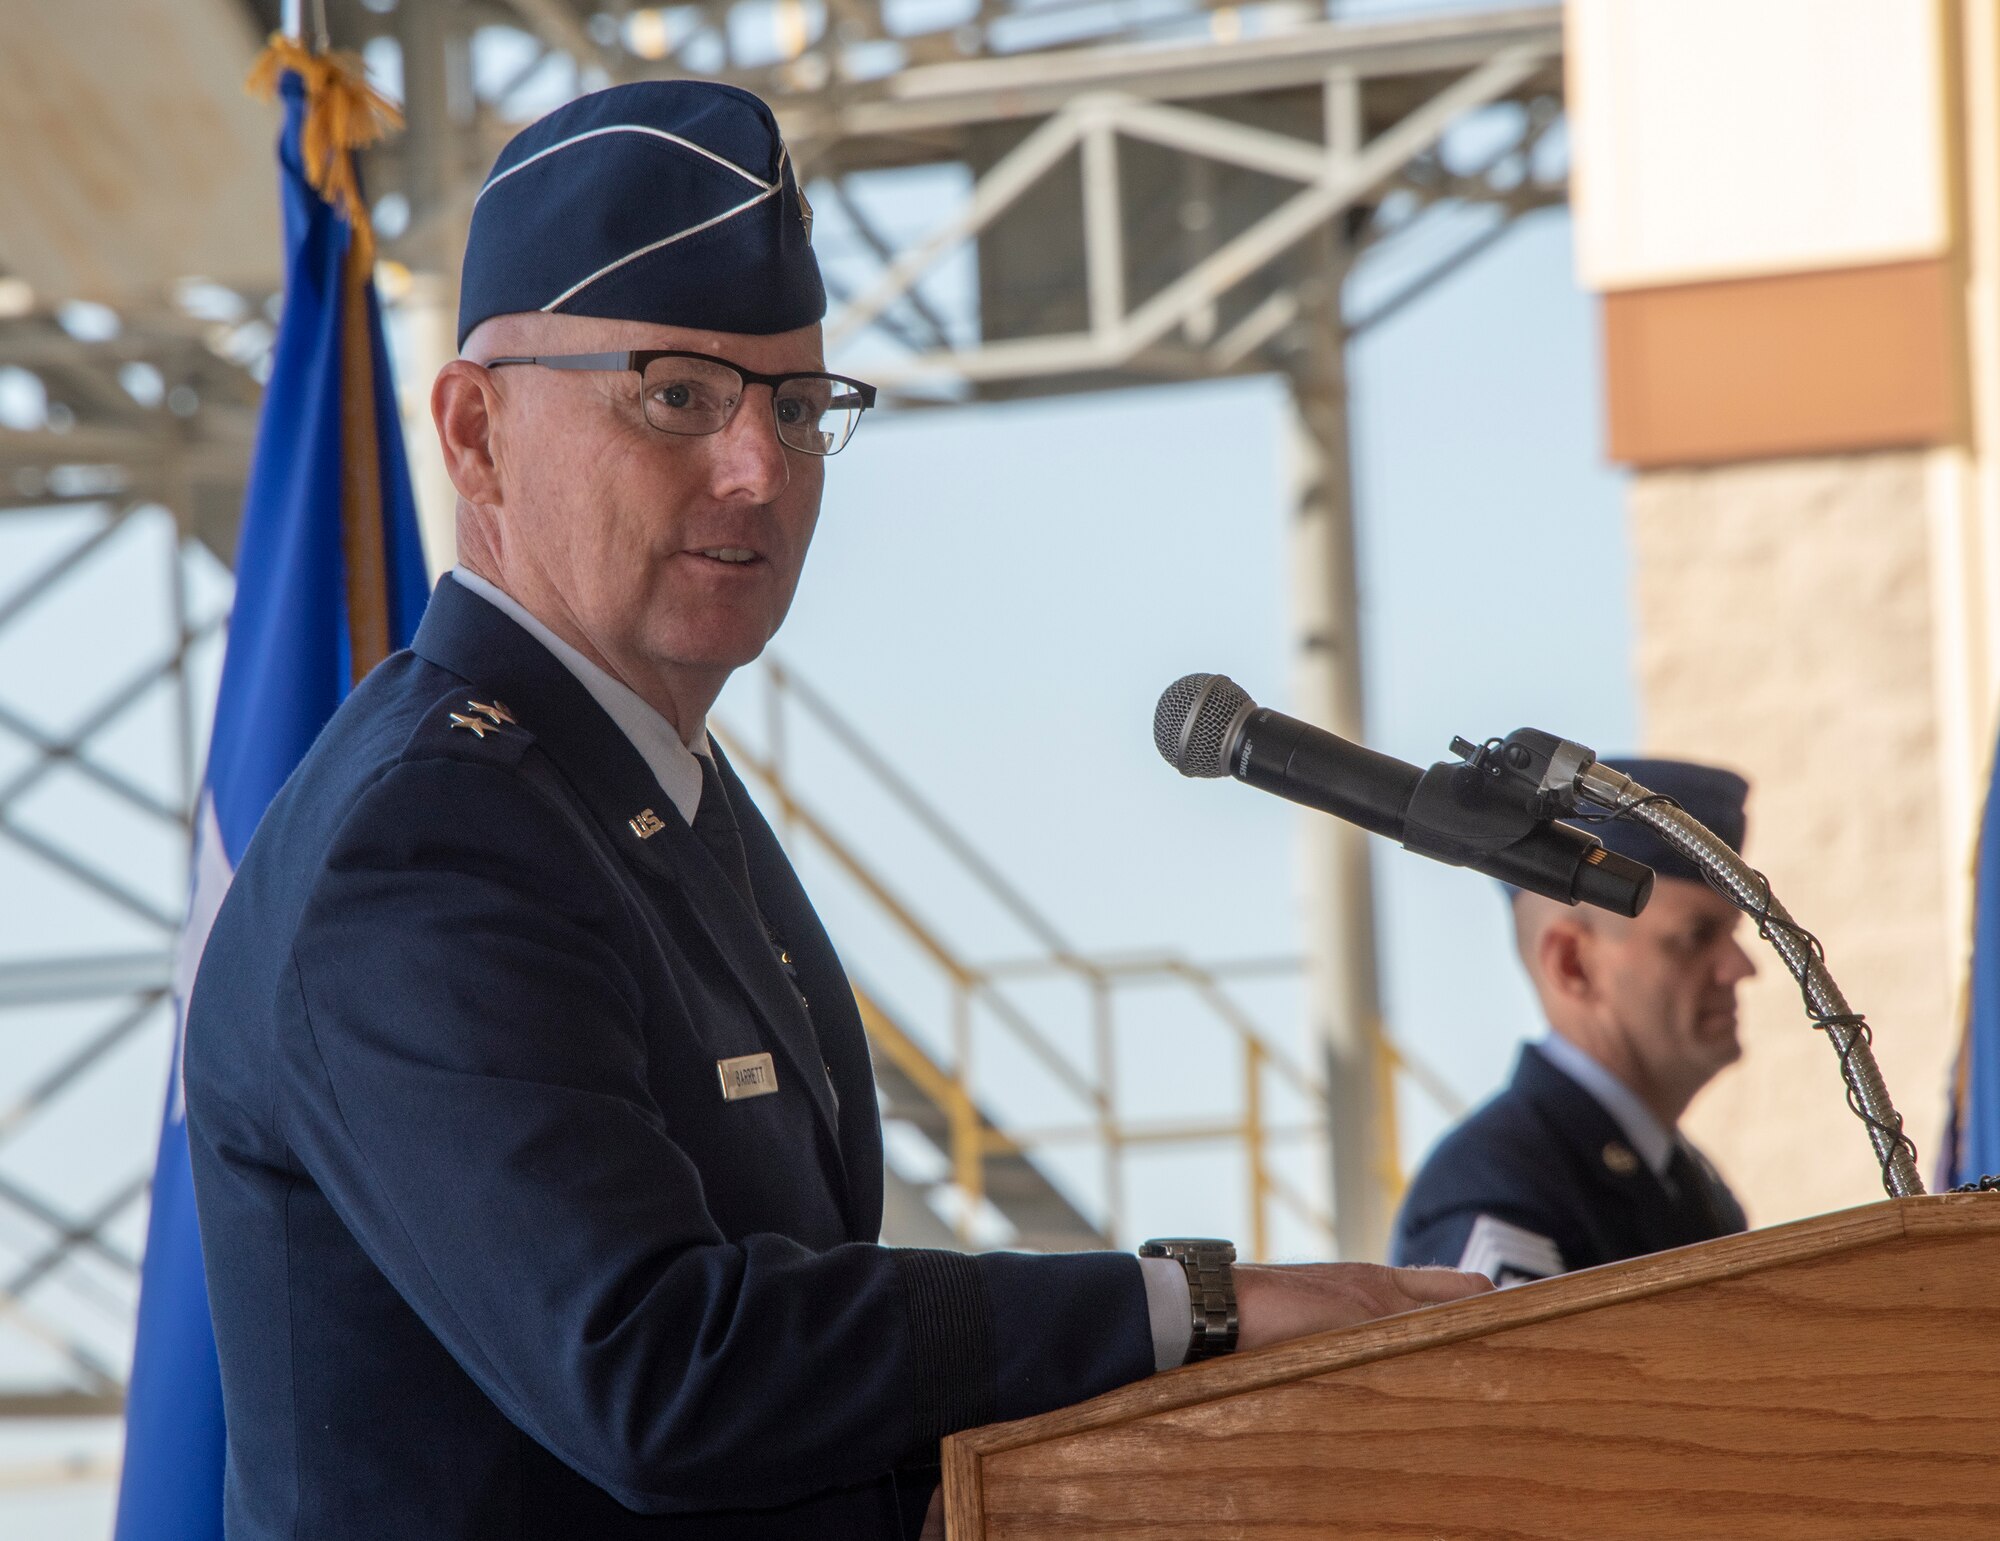 Maj. Gen. Sam Barrett, 18th Air Force commander, presides over the 60th Air Mobility Wing assumption of command ceremony at Travis Air Force Base, Calif., Sept. 18, 2018. During the ceremony, Col. Jeff Nelson, assumed command of Air Mobility Command’s largest wing. (U.S. Air Force photo by Heide Couch)